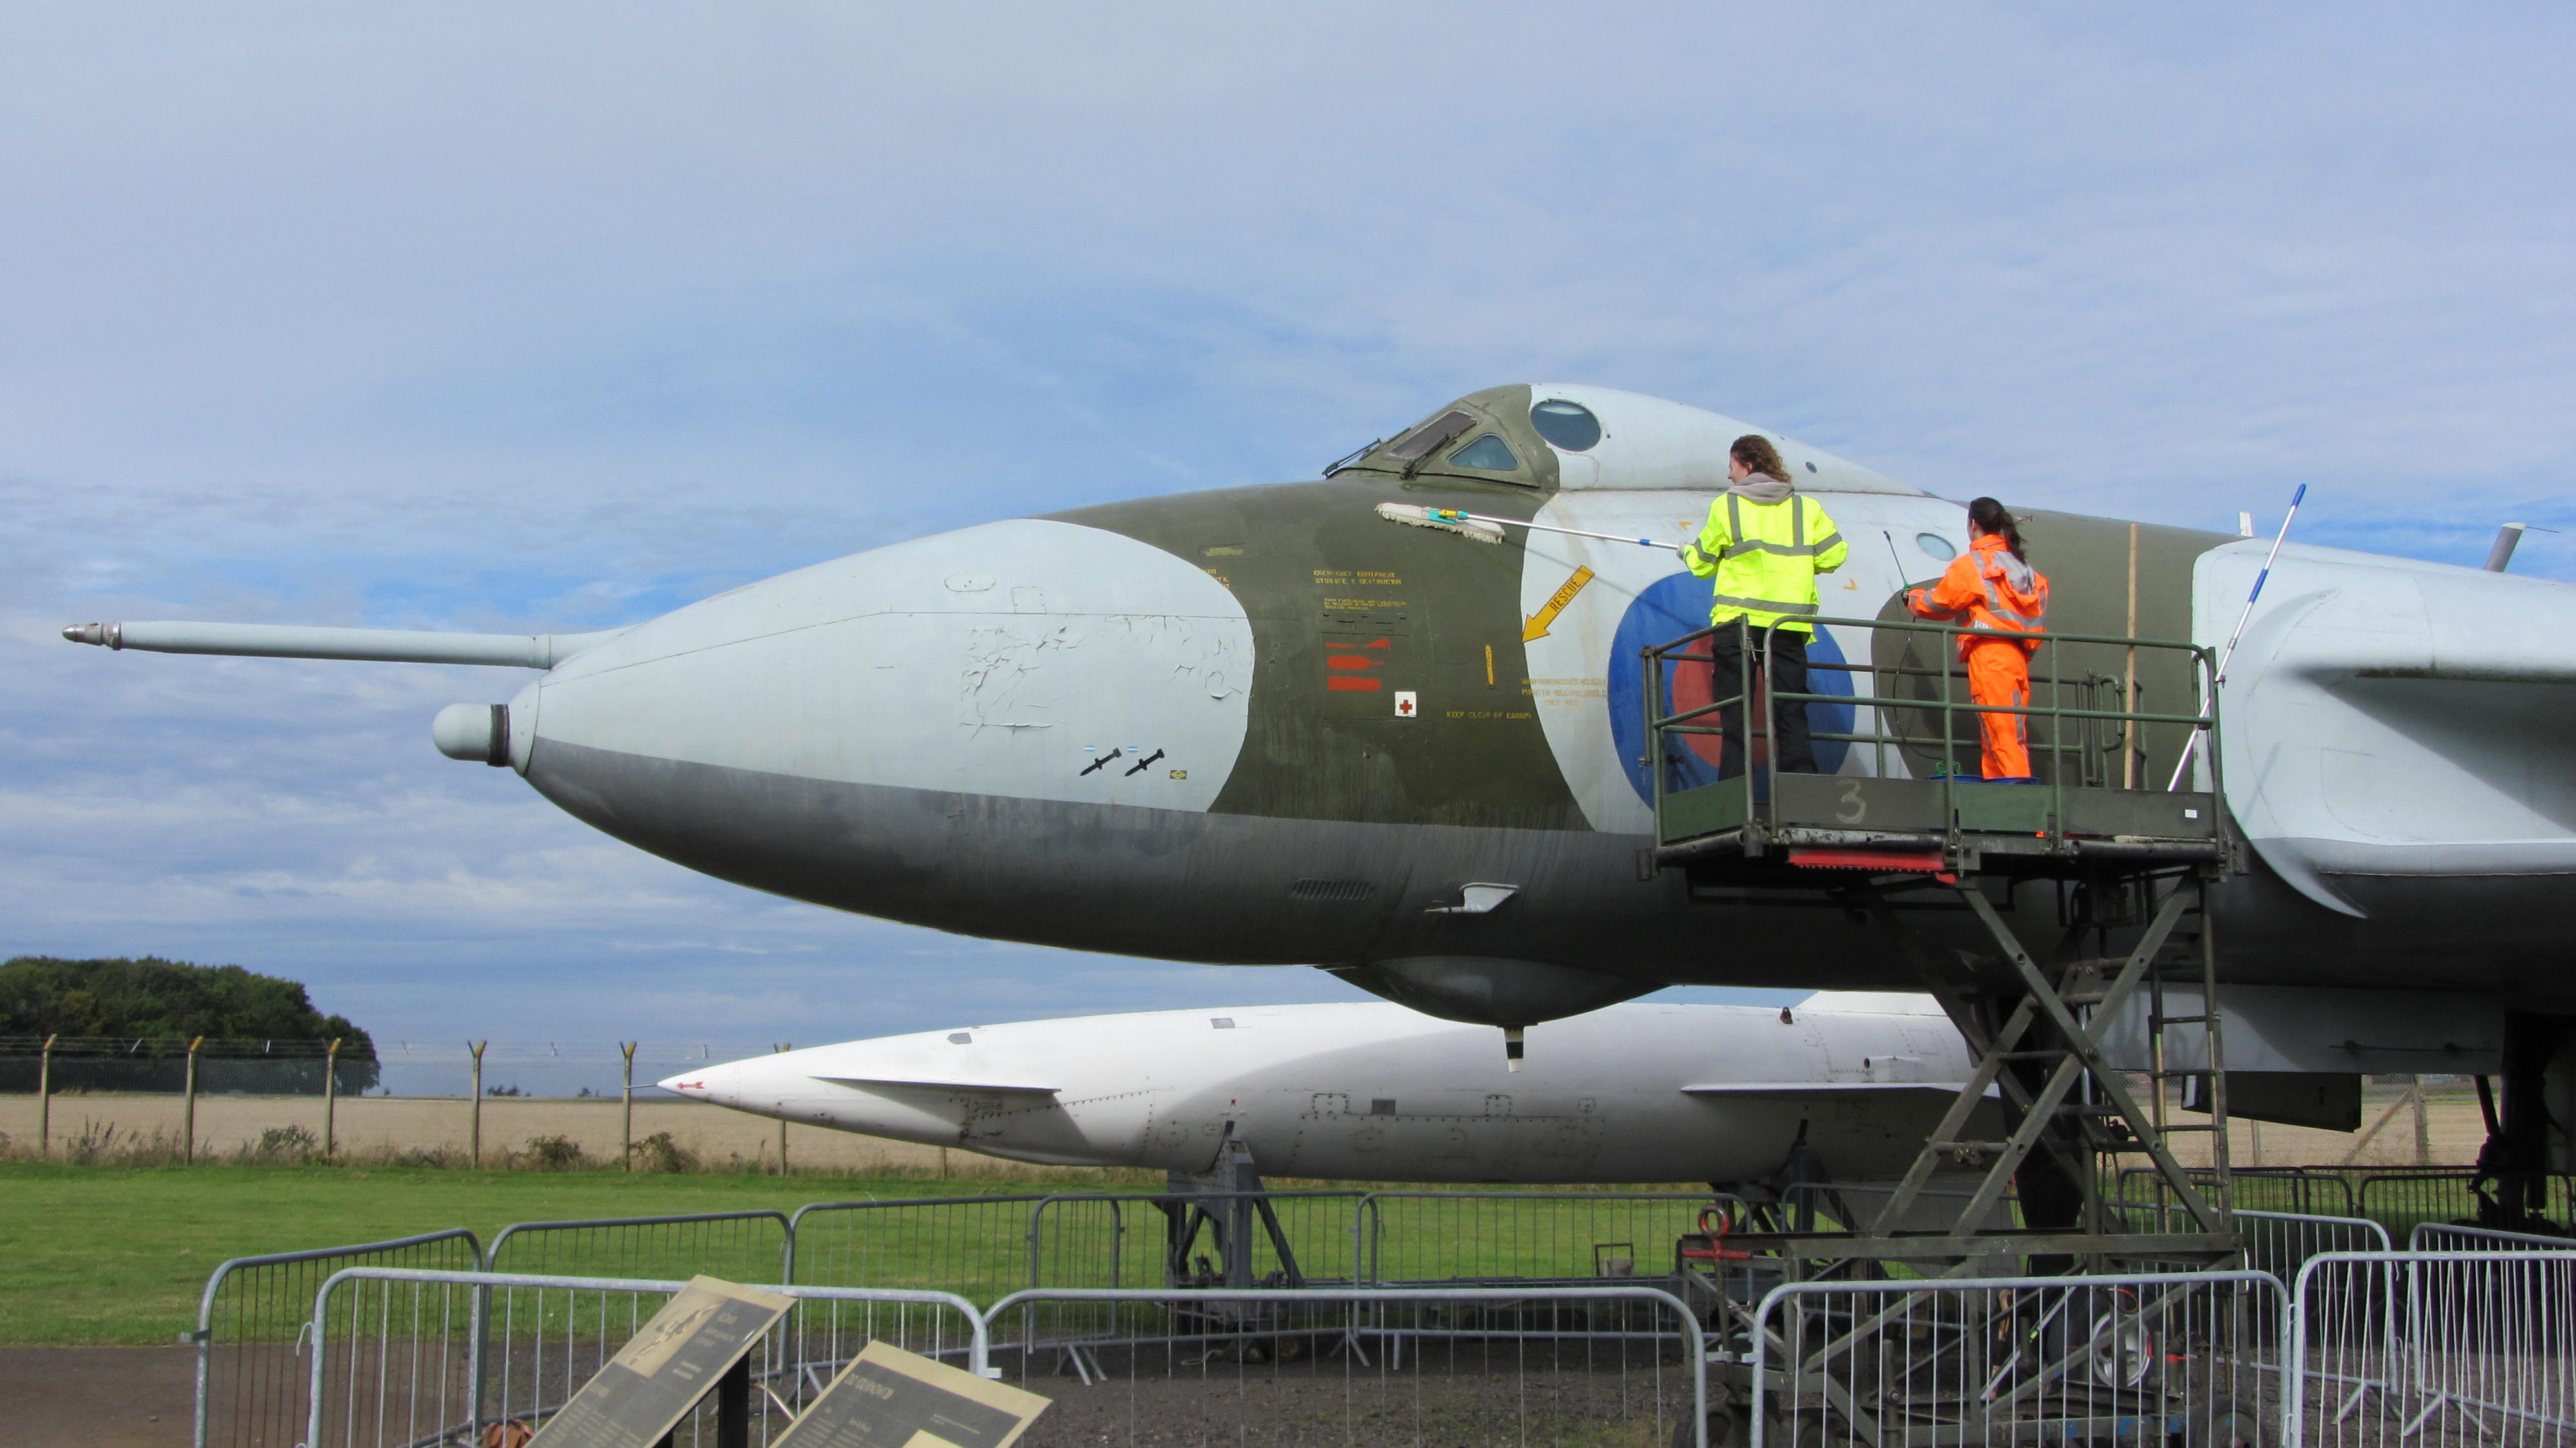 Vulcan being cleaned at National Museum of Flight